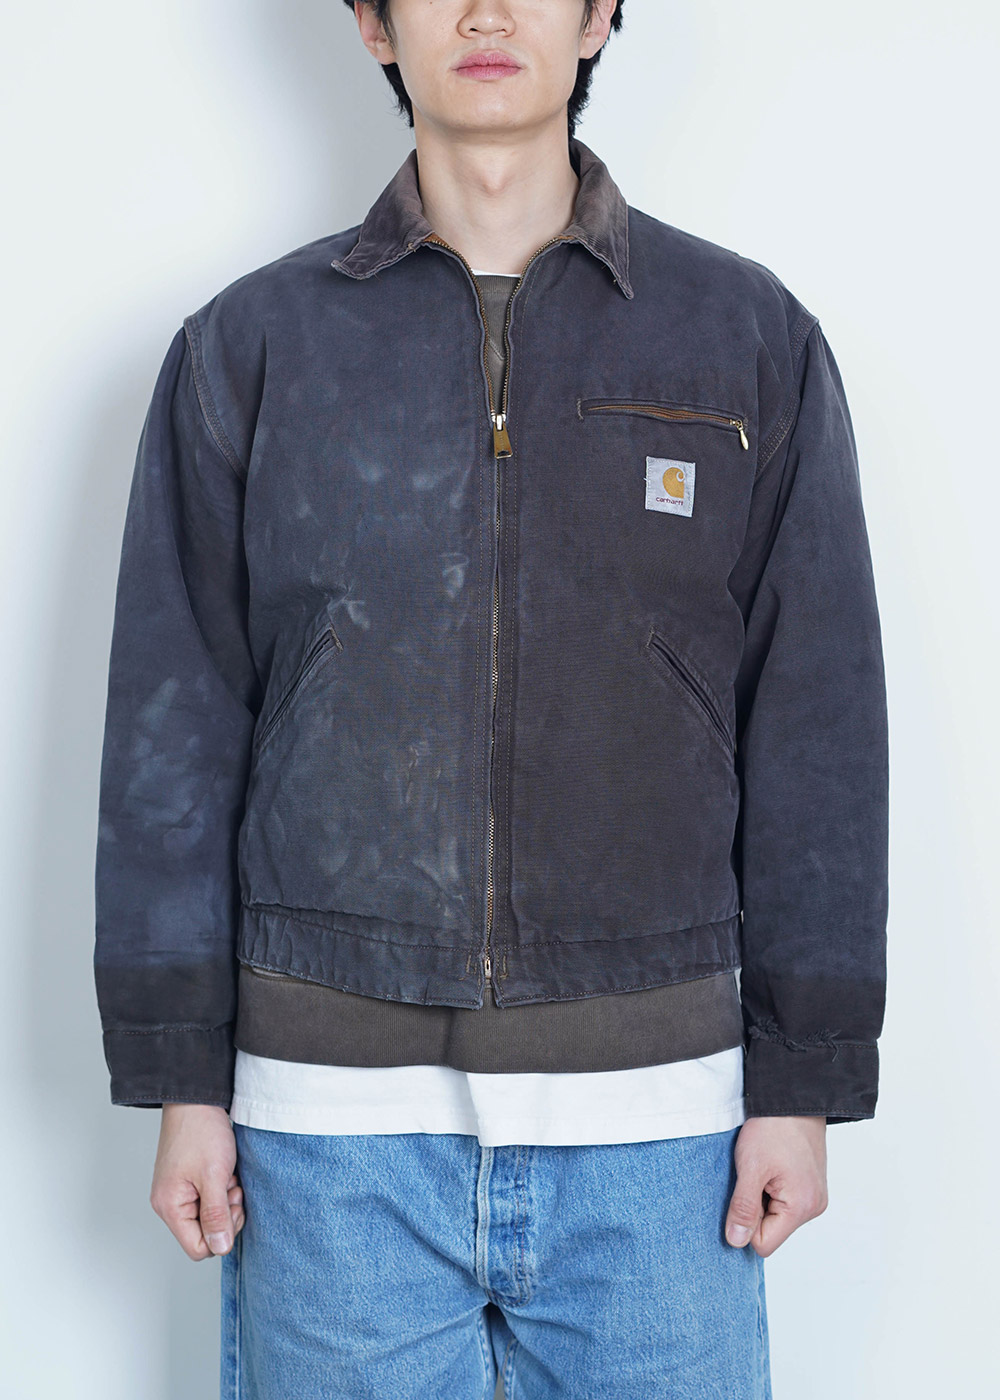 reproduction 041 / carhartt (Overdyed)